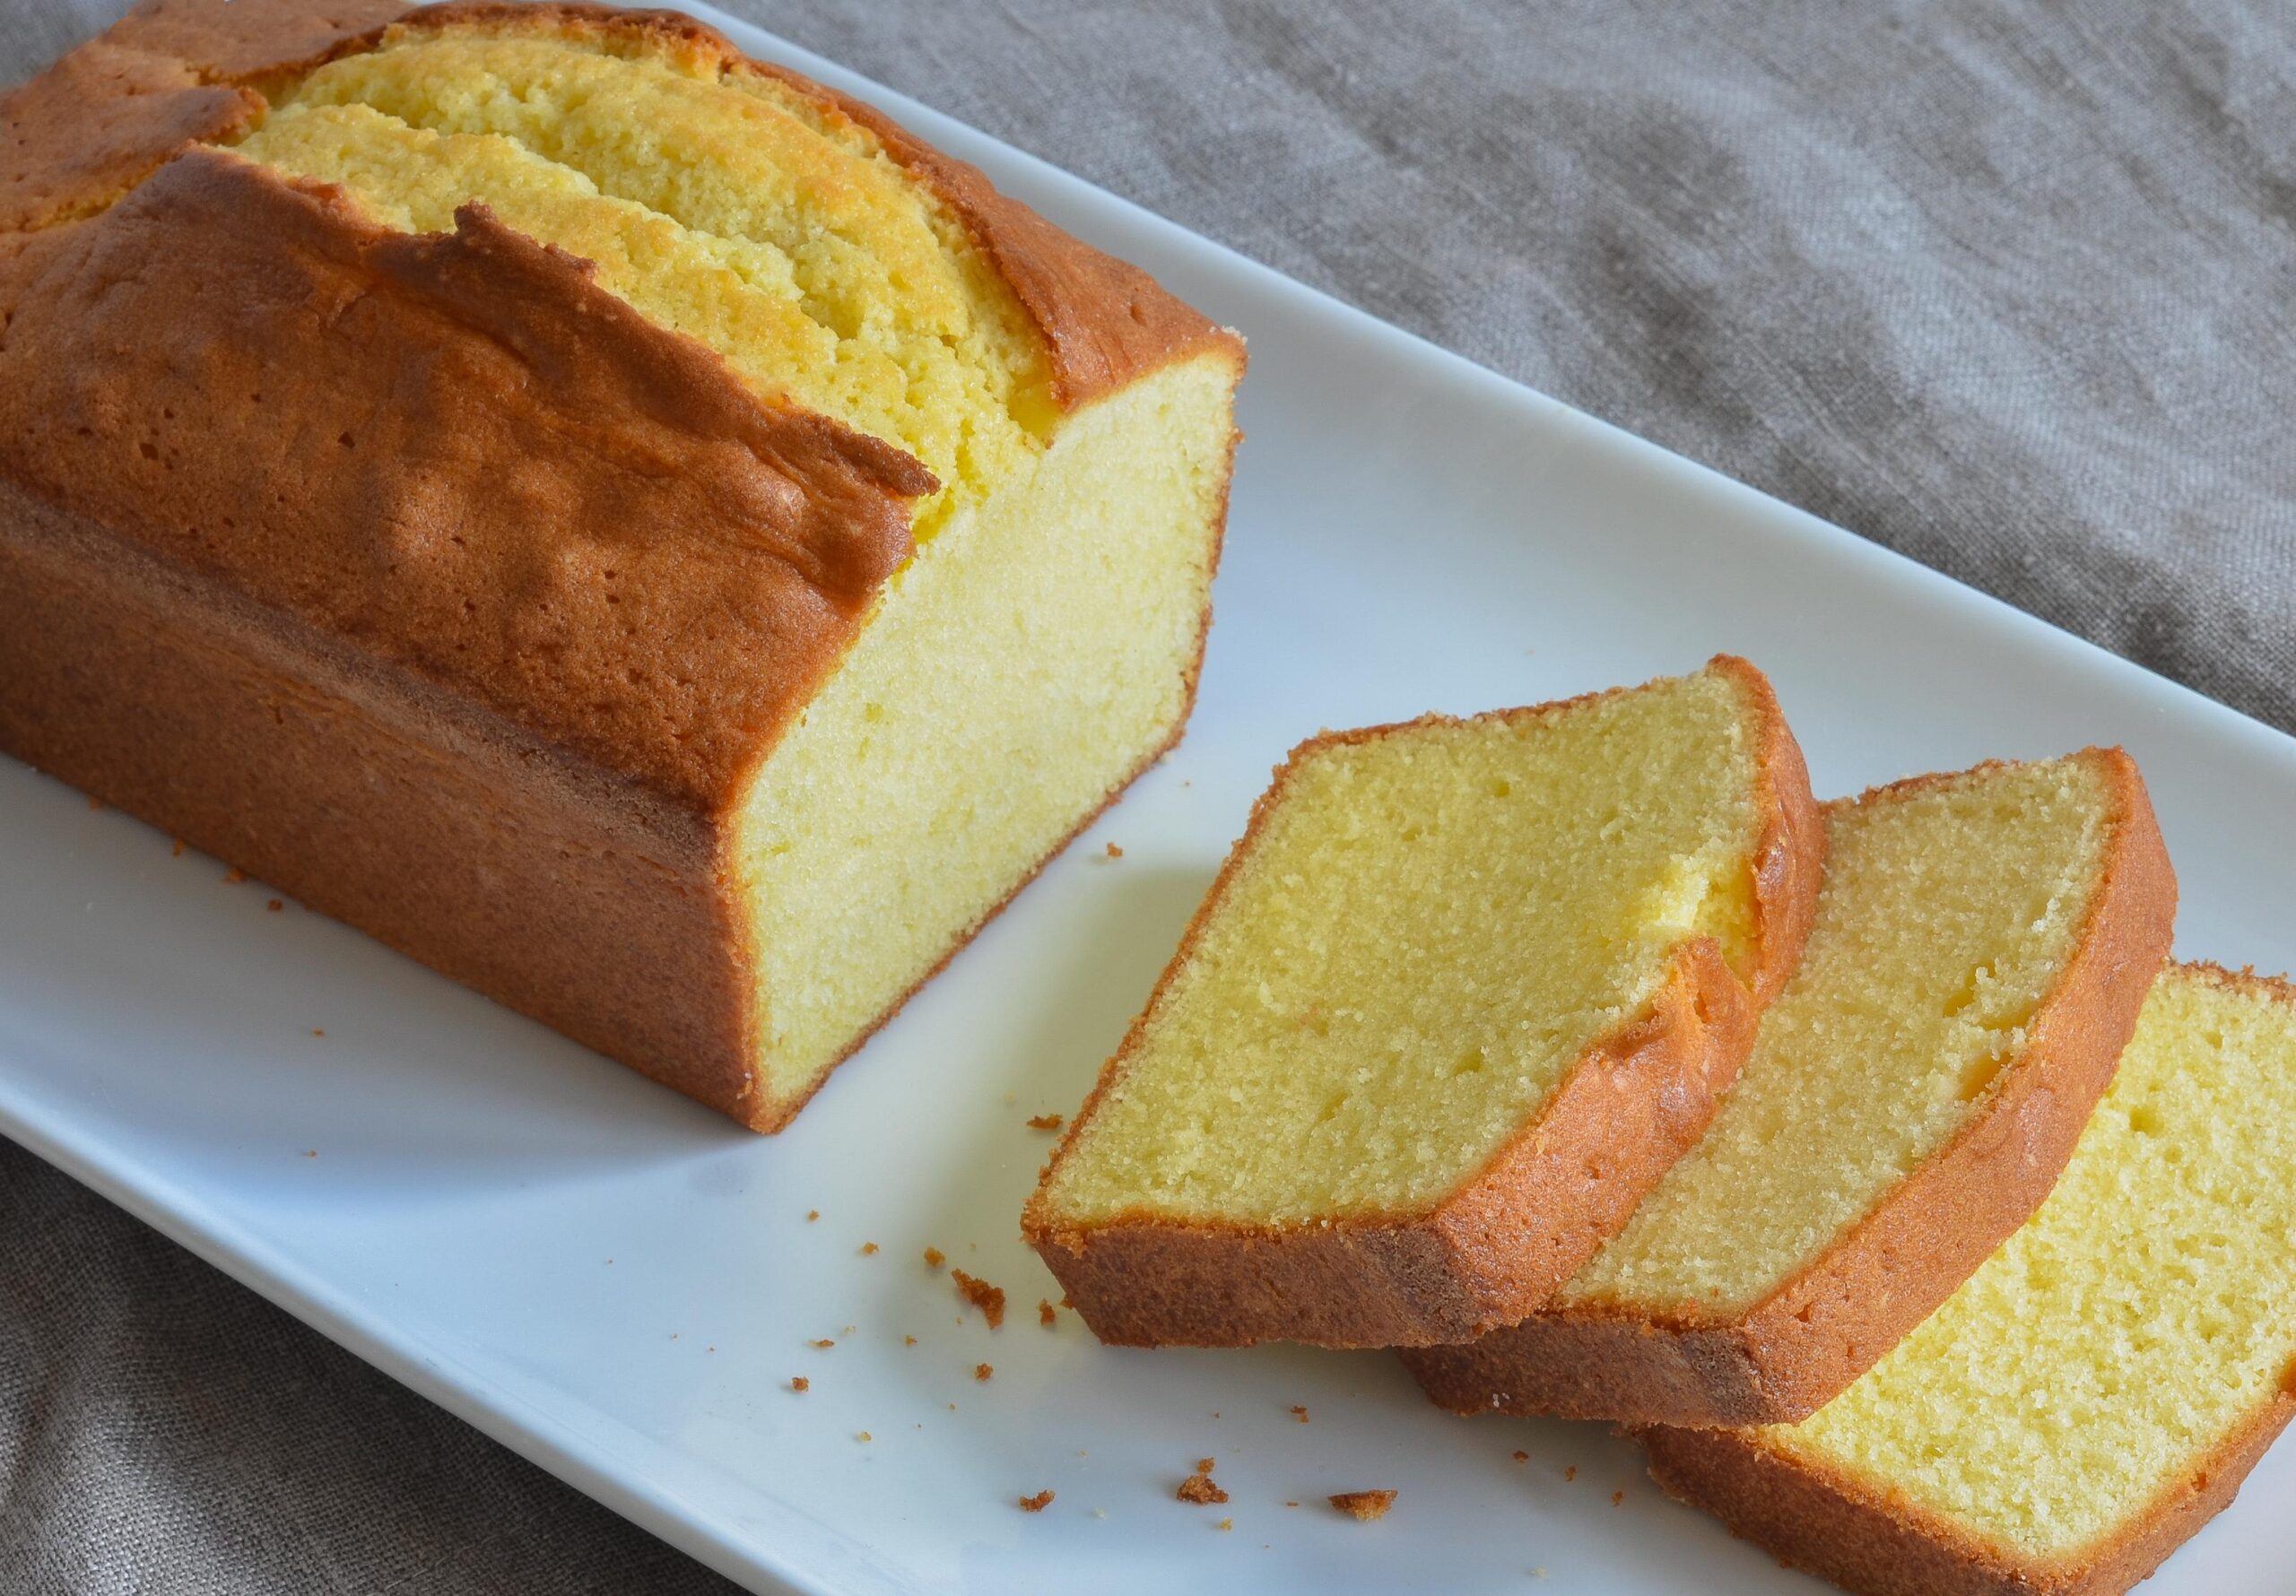  This is one pound cake that won't weigh you down!